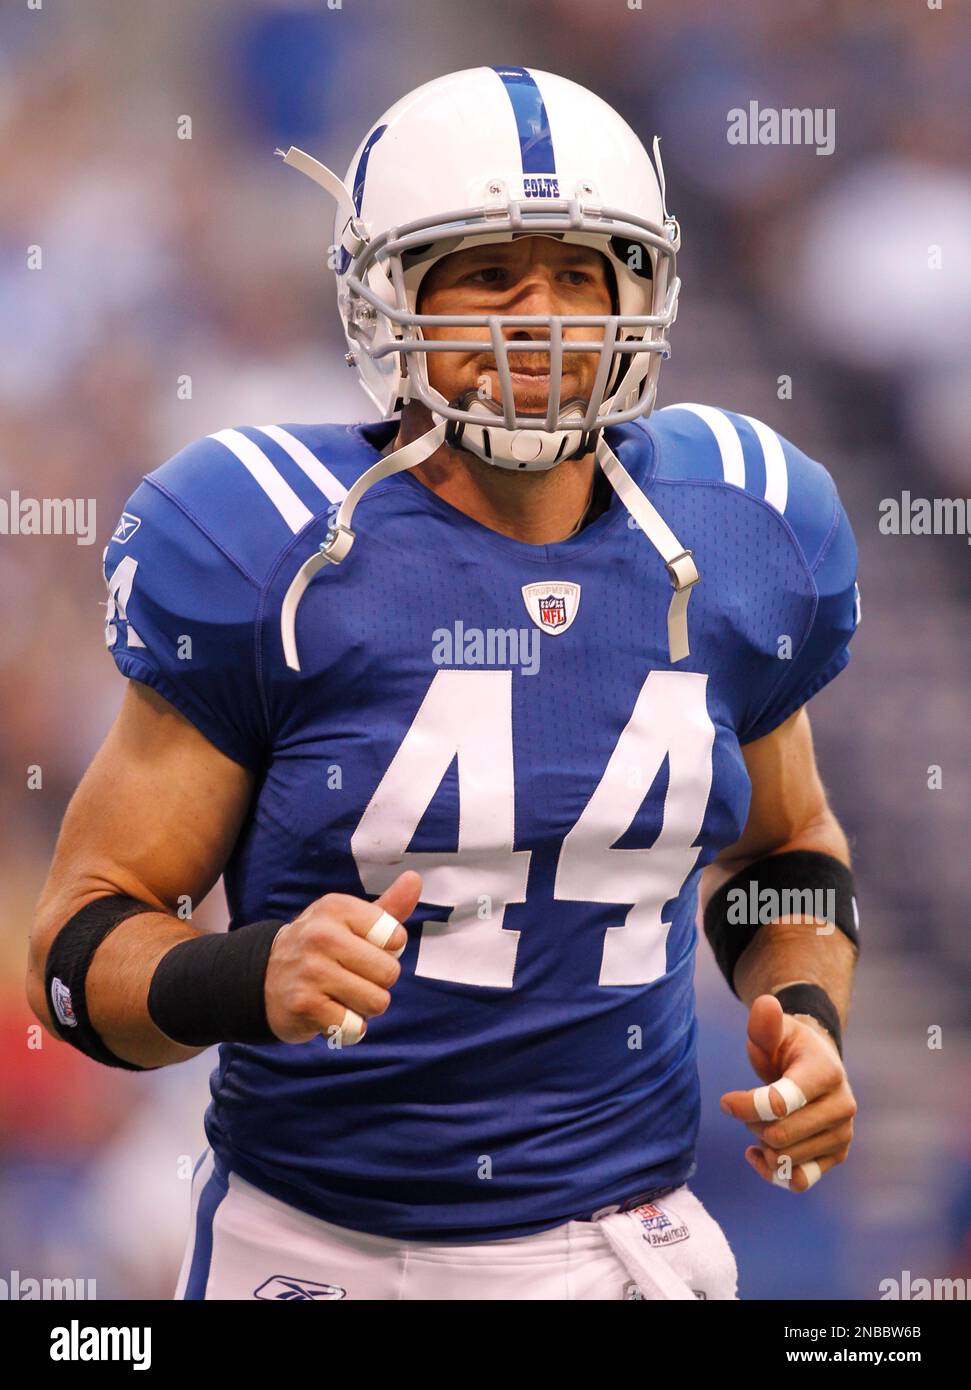 Indianapolis Colts tight end Dallas Clark (44) during the second quarter of  an NFL preseason football game in Indianapolis, Friday, Aug. 19, 2011. (AP  Photo/AJ Mast Stock Photo - Alamy